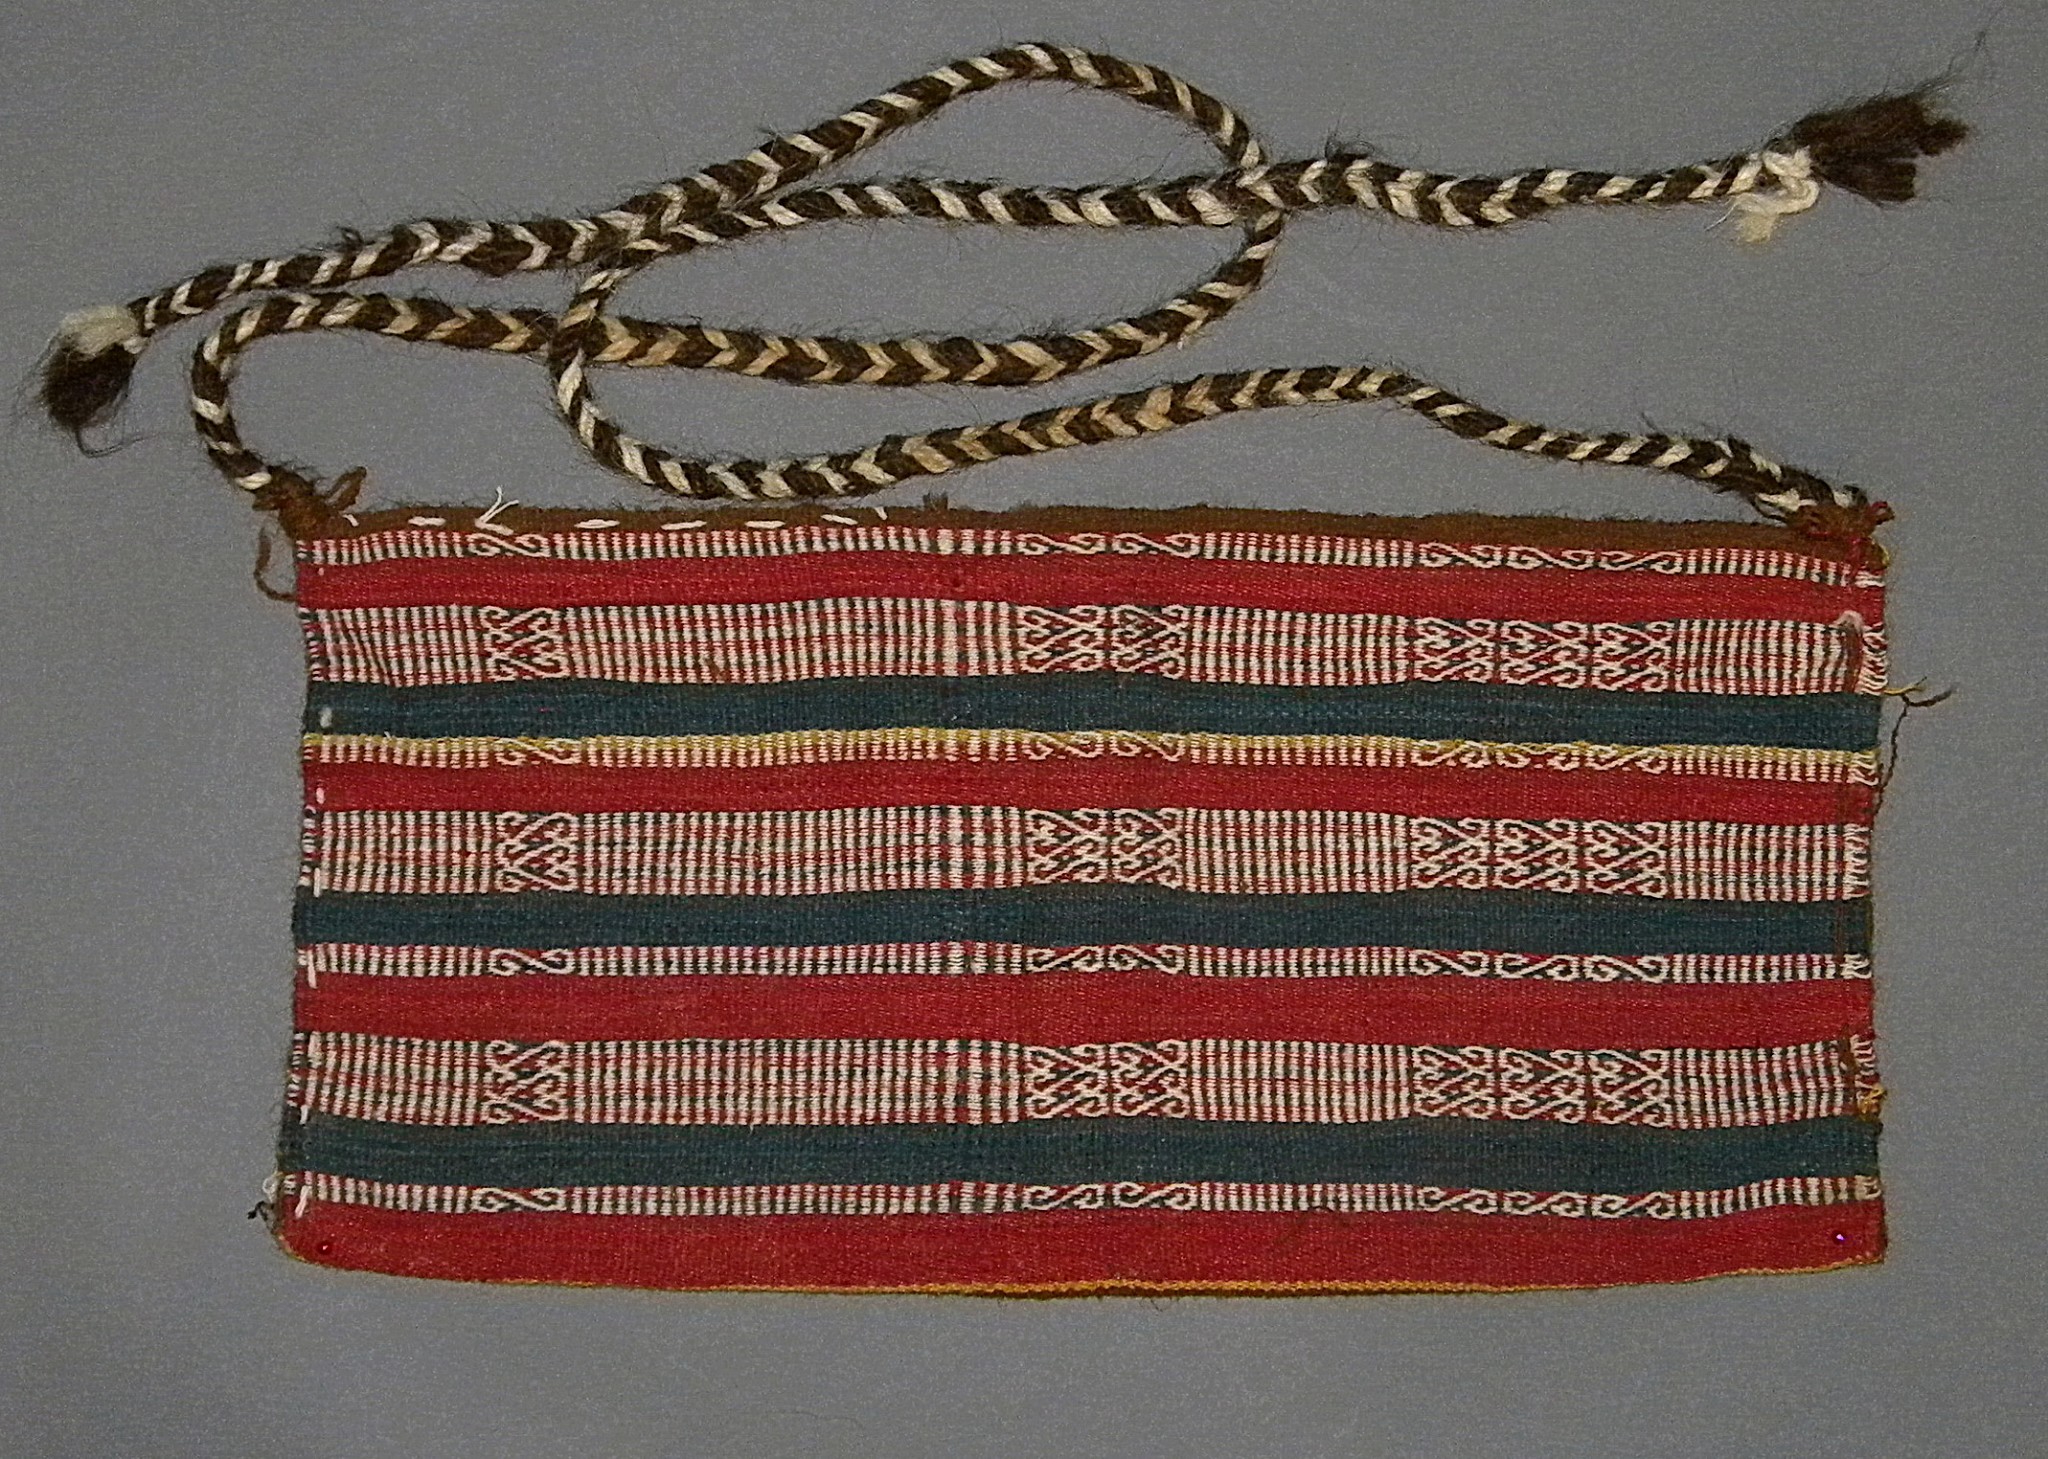 Chile, Inca Faja Bolsa (Bag Belt)
This Faja Bolsa has  extremely good colors and presevation, in blue, red and white. geometric striped design.  The belt was worn around the waist and over a tunic. As tunics have not pockets, the bag belt allowed the wearer to store items from coca leaves to corn, something like a Money Belt is used for today.  A  similar example is found in "Arica, Diez mil Anos", Museo Chileno de Arte Precolombino, page 80, no. 180 & 181. Woven of alpaca wools. Weavings from Pica, Chile are usually in excellent condition with bright colors.
Media: Textile
Dimensions: Width: 6  x  Length:. 17 � in.
$2,750
90247